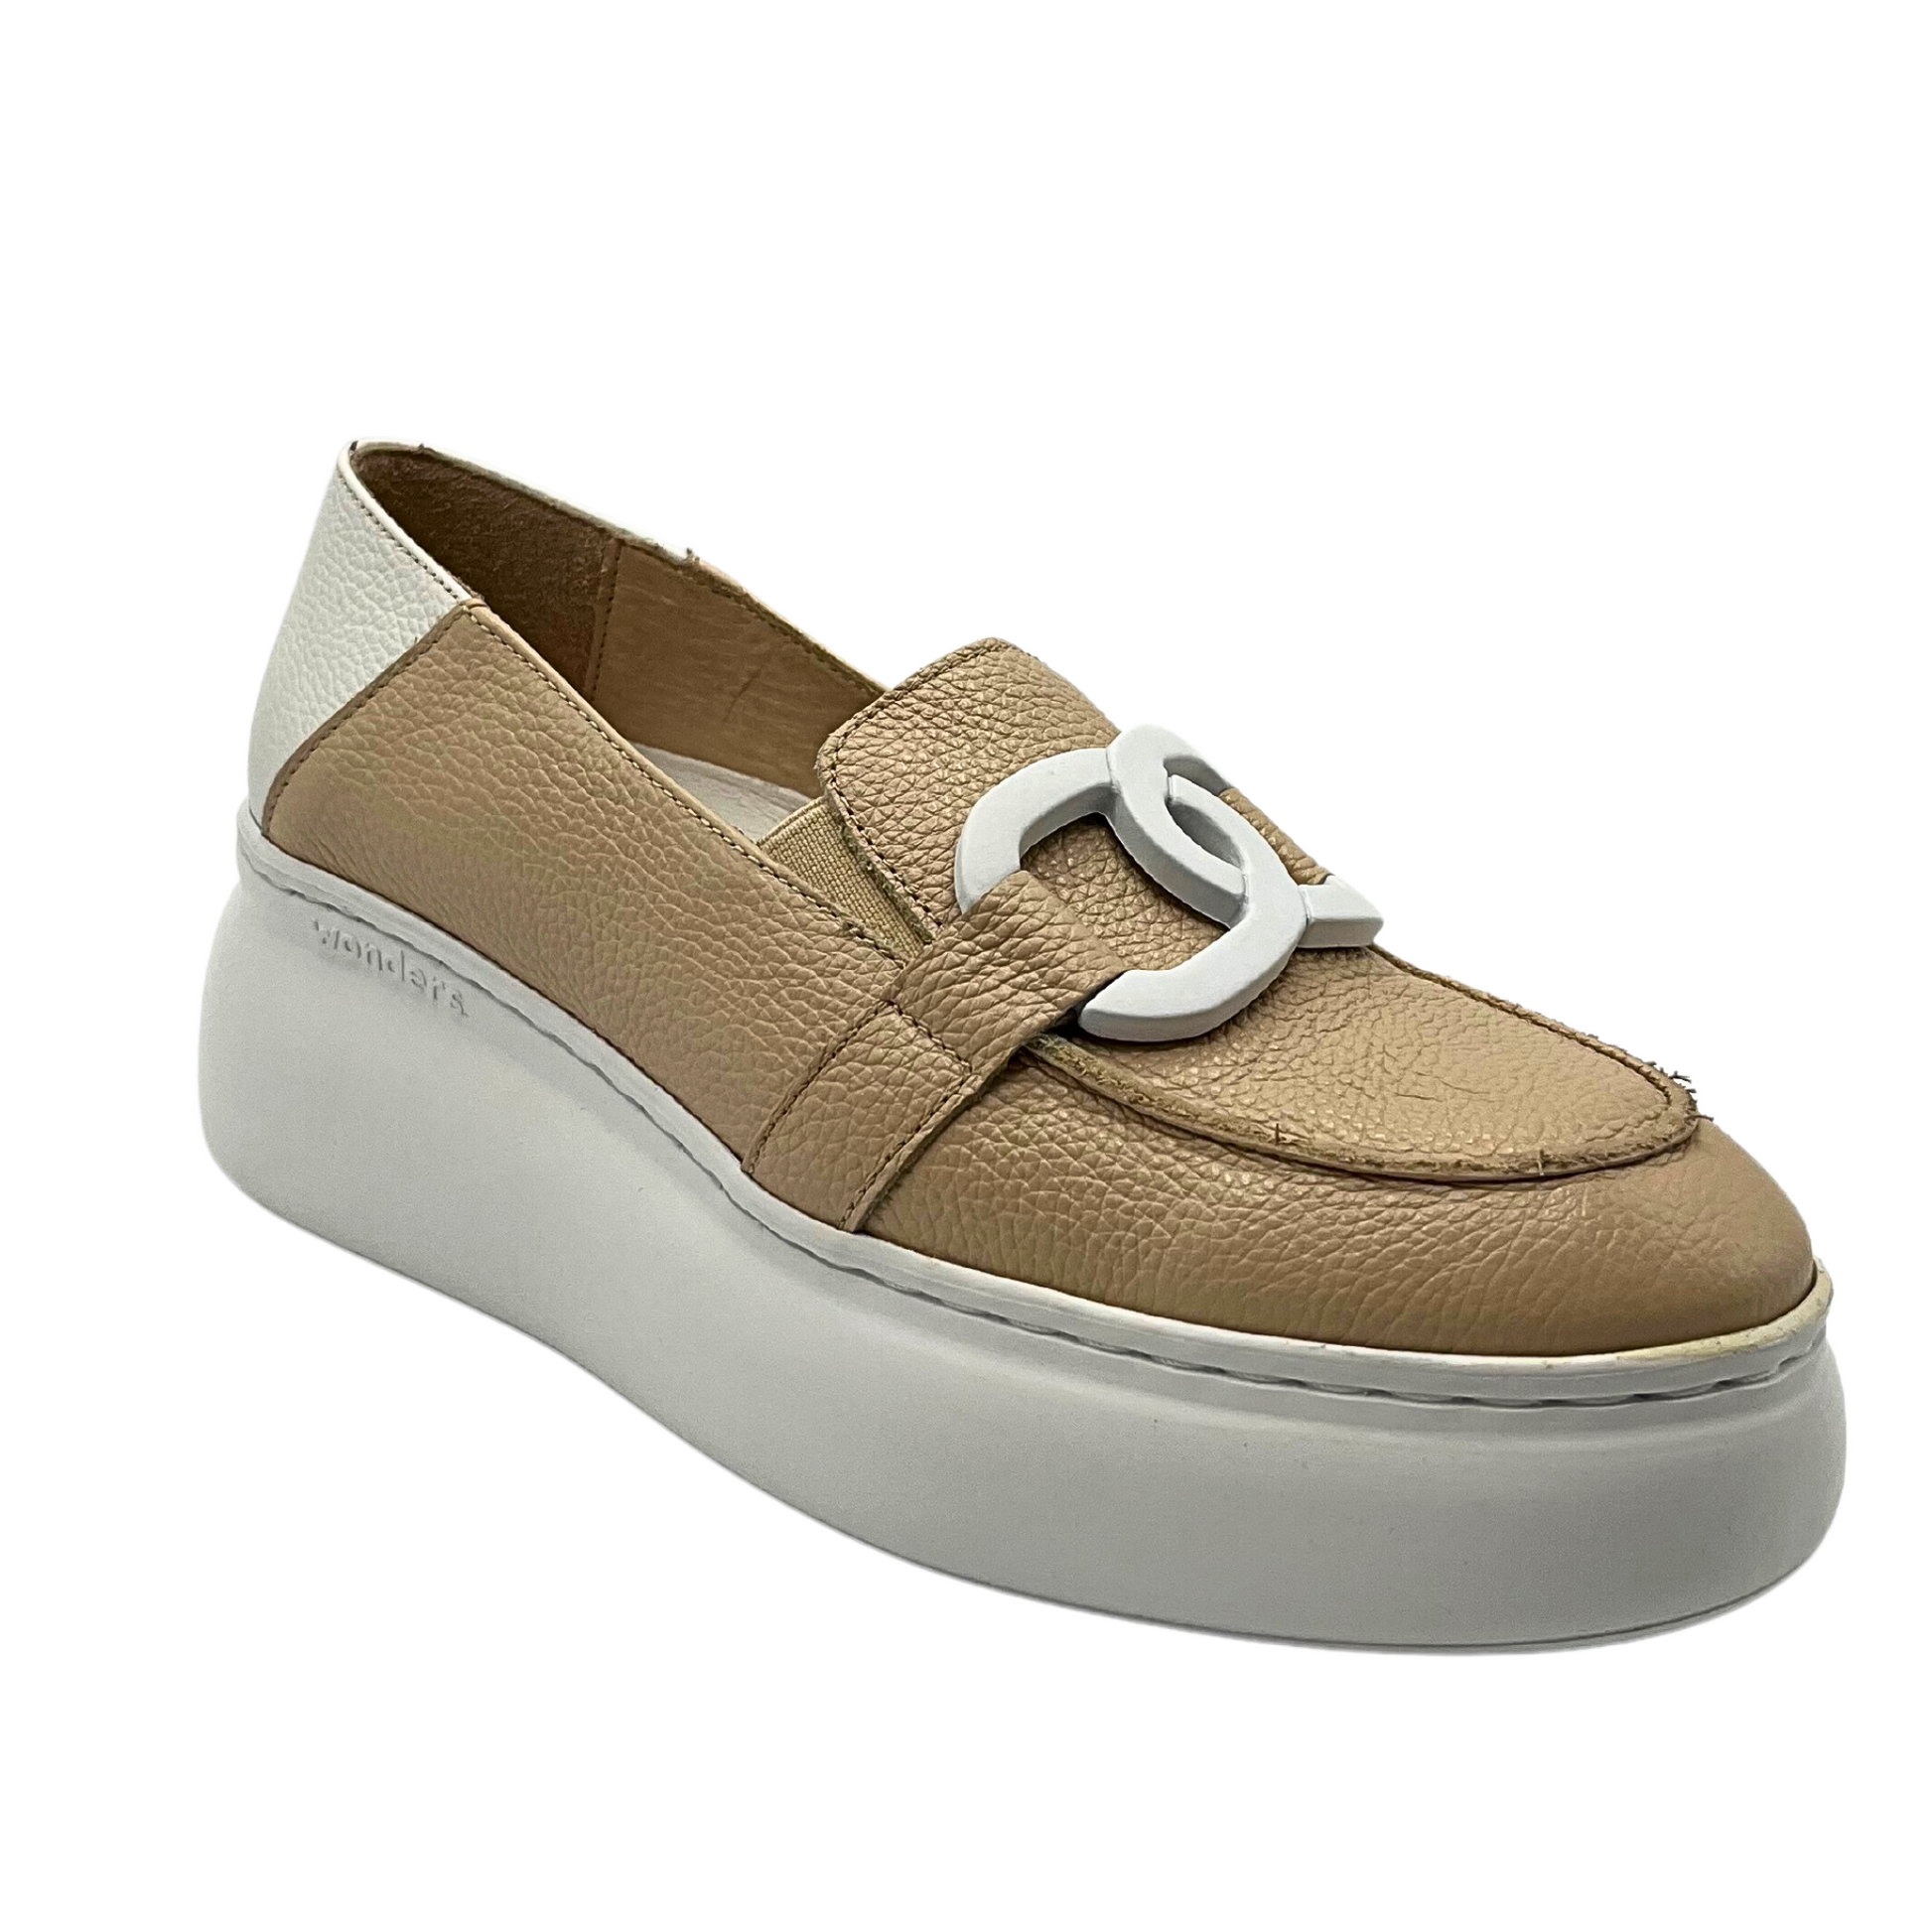 Angled front view of the Wonders Clara slip on loafer  with tan coloured upper and white sole